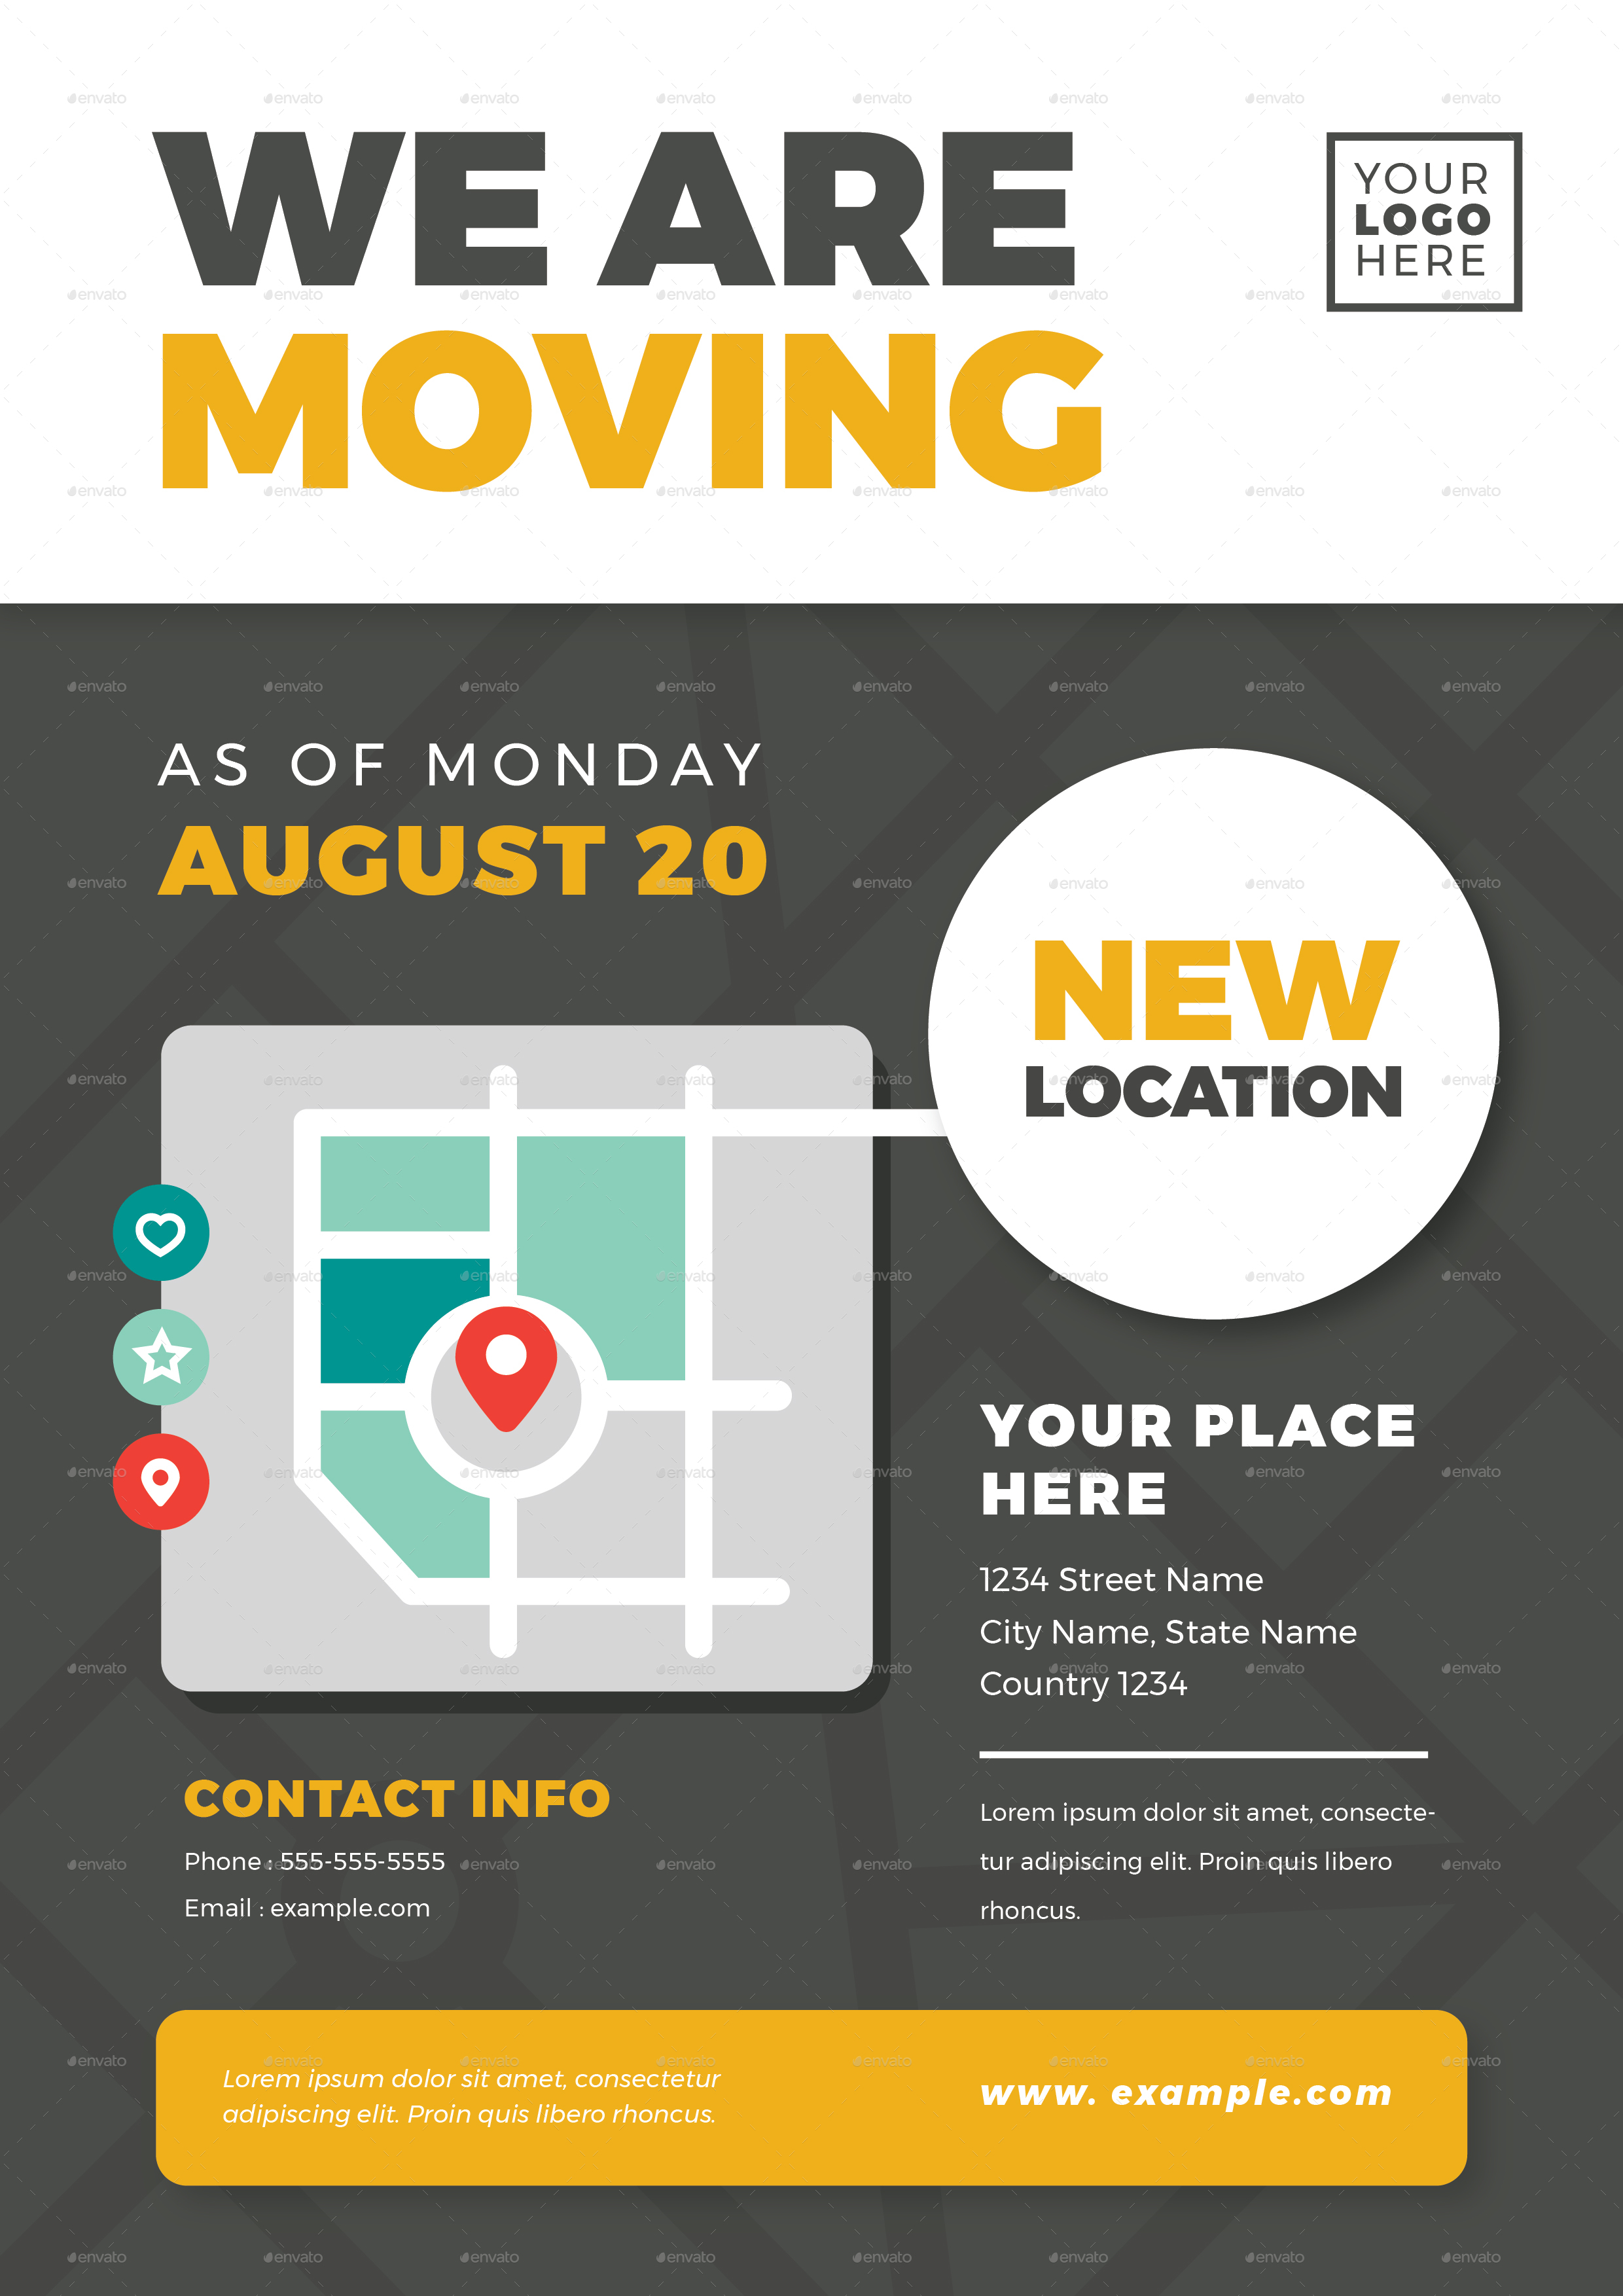 we-are-moving-flyer-templates-by-vector-vactory-graphicriver